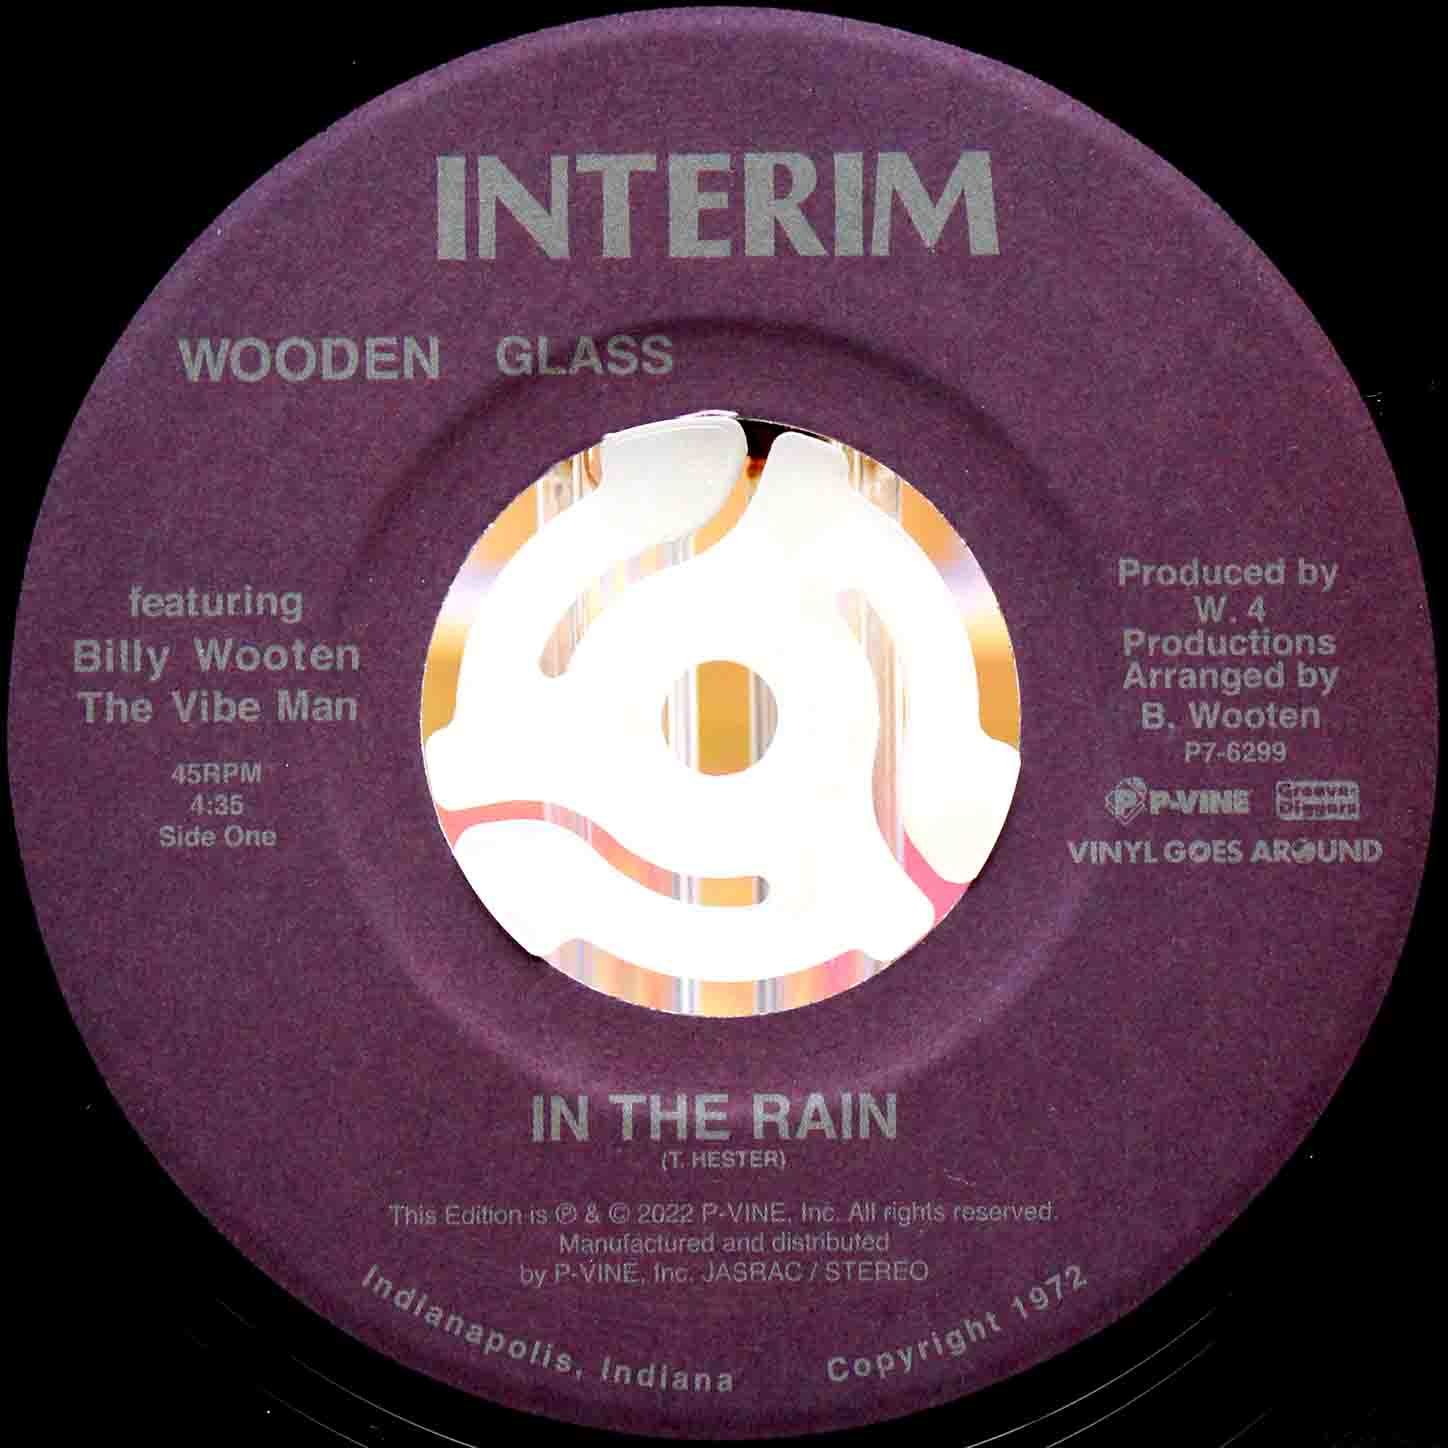 The Wooden Glass Featuring Billy Wooten ‎– In the rain 04